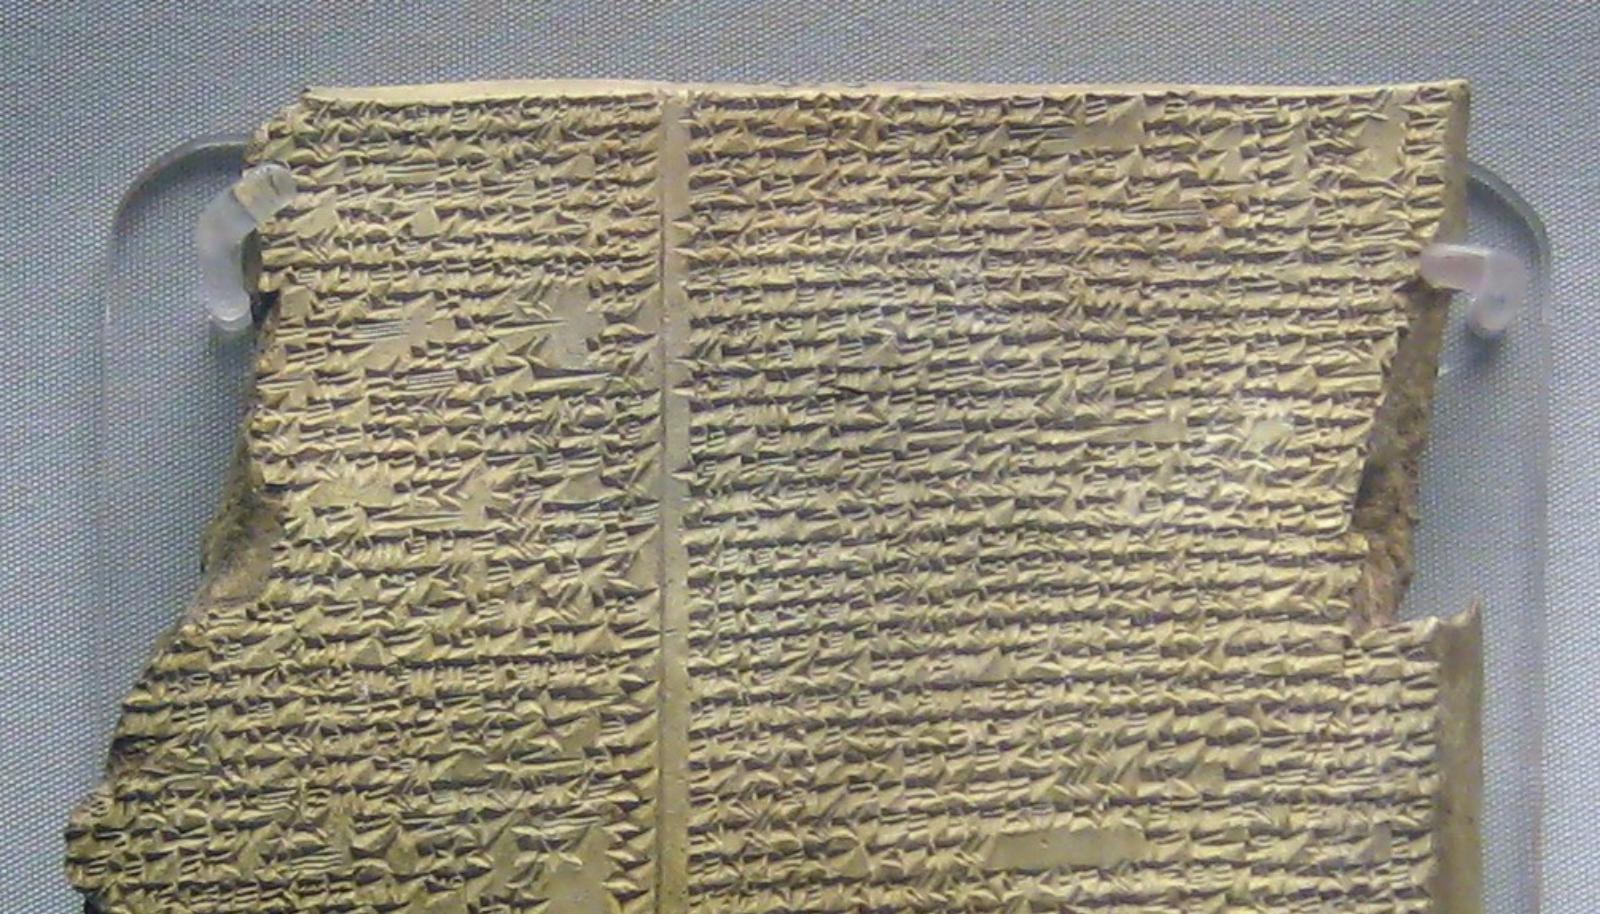 One of the tablets with the myths of Gilgamesh.